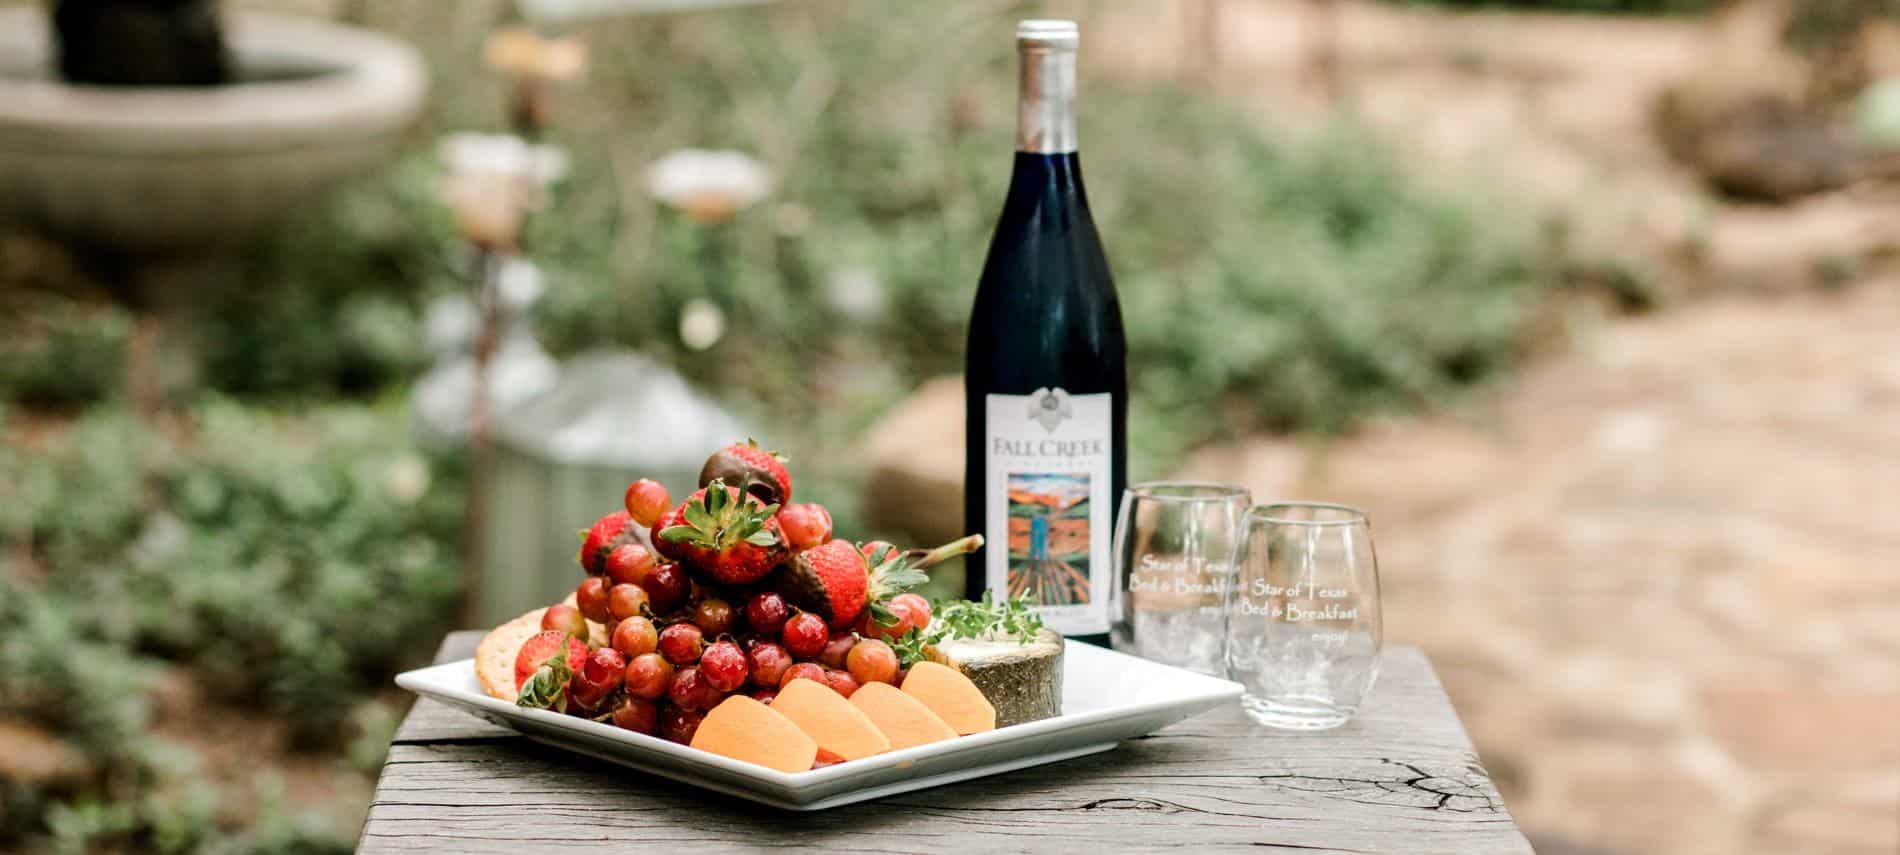 Outdoor table topped with white tray piled with fresh fruit and cheese, bottle of wine, two wine glasses